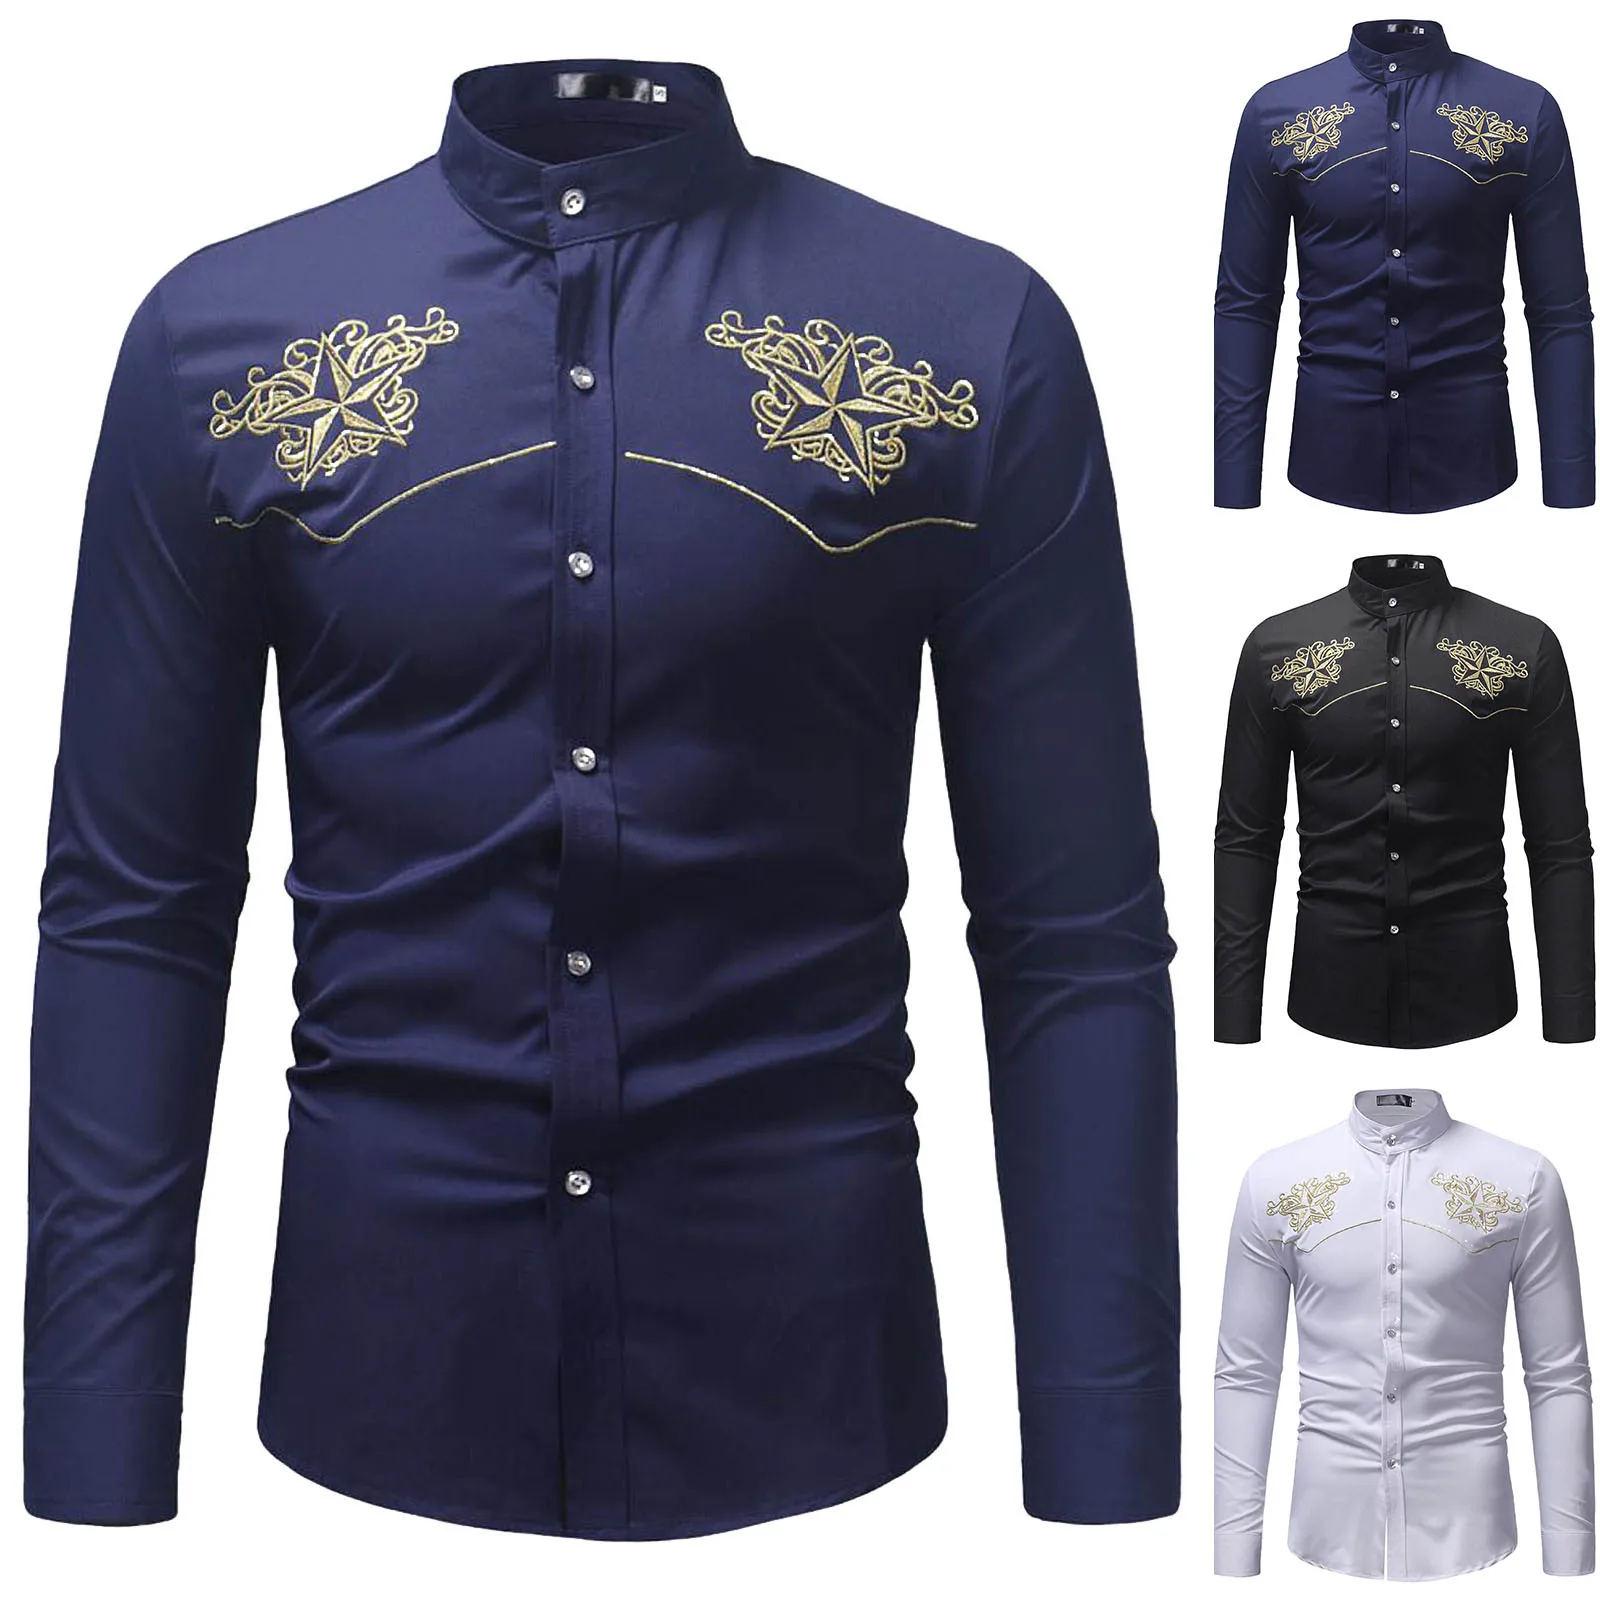 New Texas Republic Star Embroidery Casual Long Sleeve Western Shirts